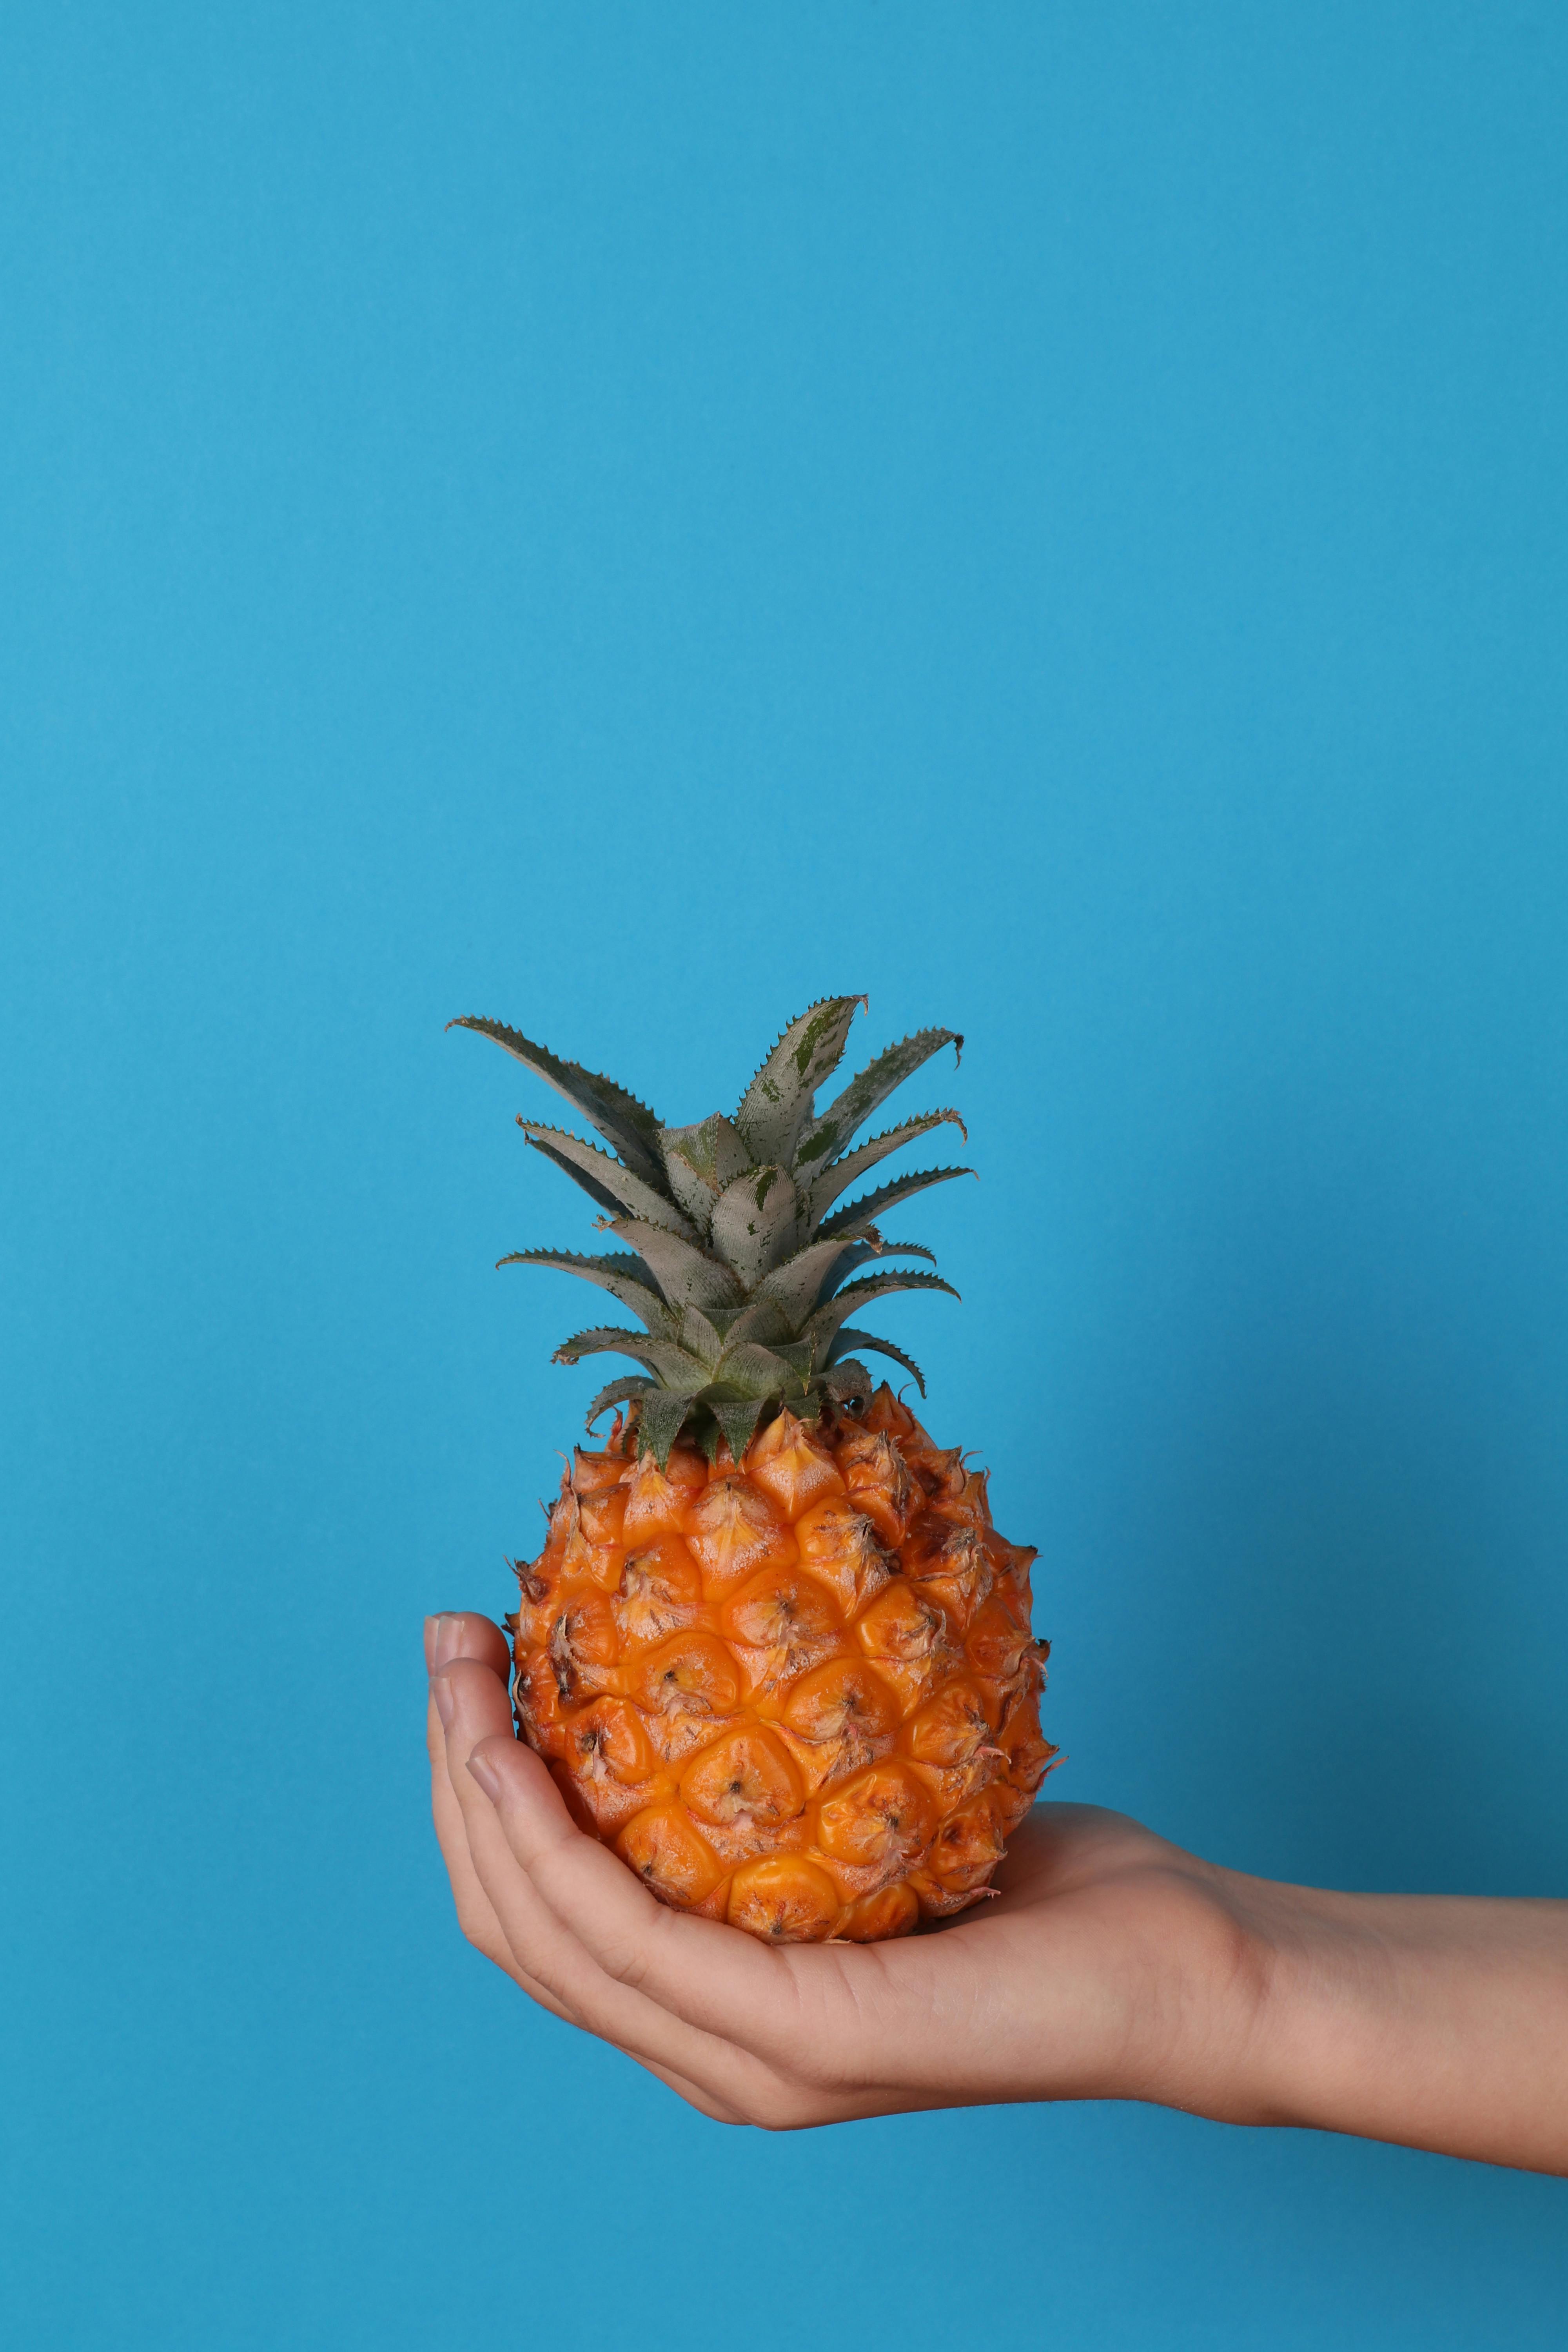 Hand Holding A Pineapple Photos, Download Free Hand Holding A Pineapple ...